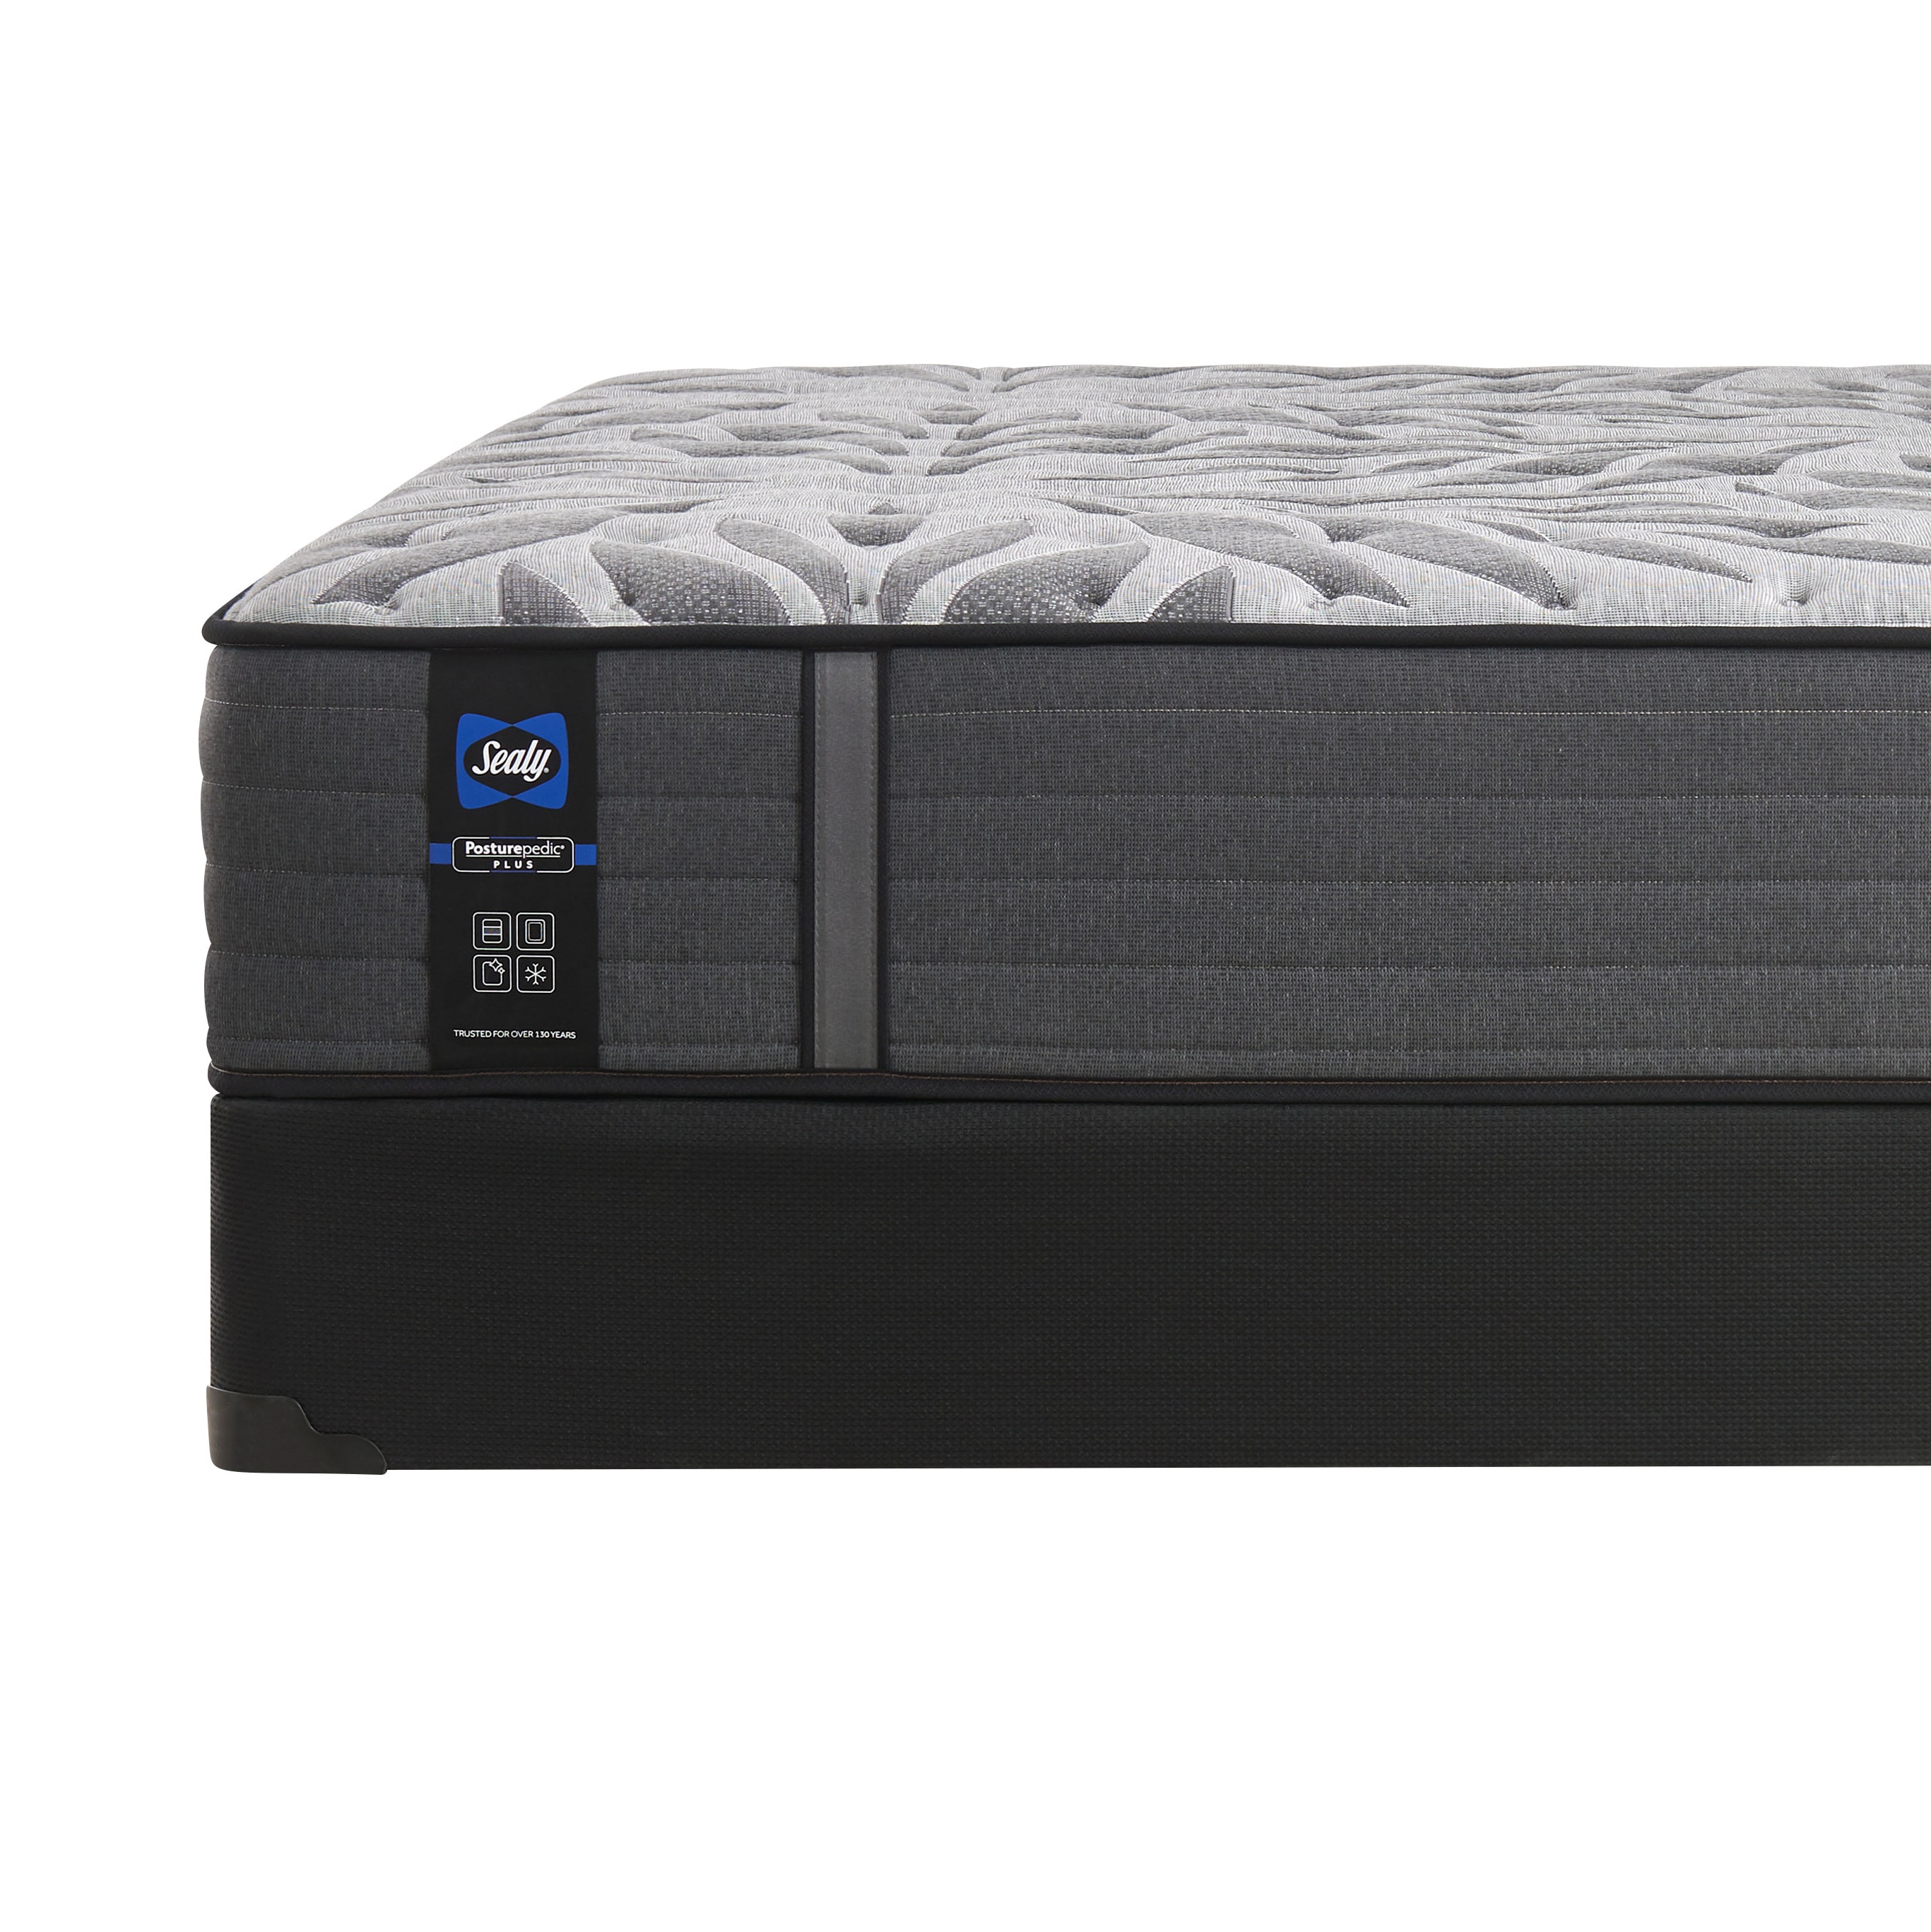 Sealy Sealy posturepedic 14-in Extra Firm Full Innerspring Mattress